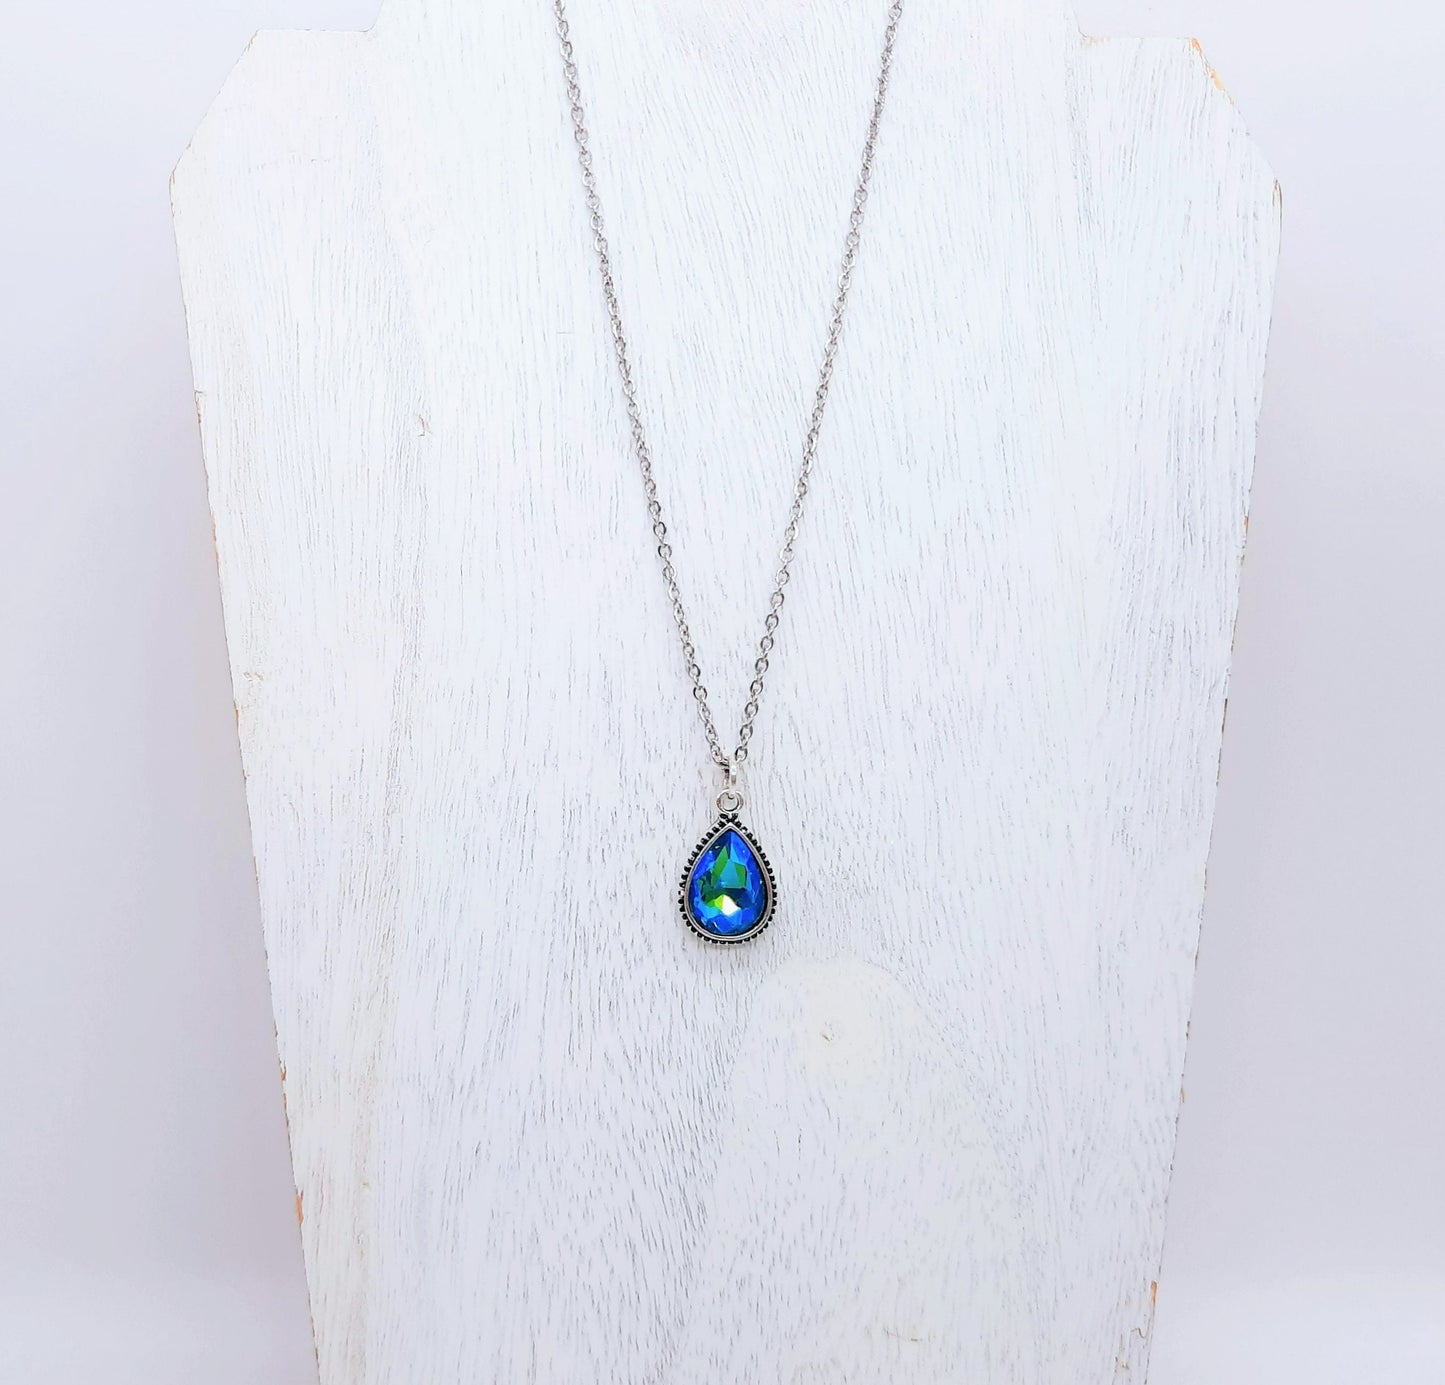 Handmade / Handcrafted Antiqued Silver Teal Blue Rhinestone Teardrop Pendant Necklace, 18" Stainless Steel Chain, Hypoallergenic